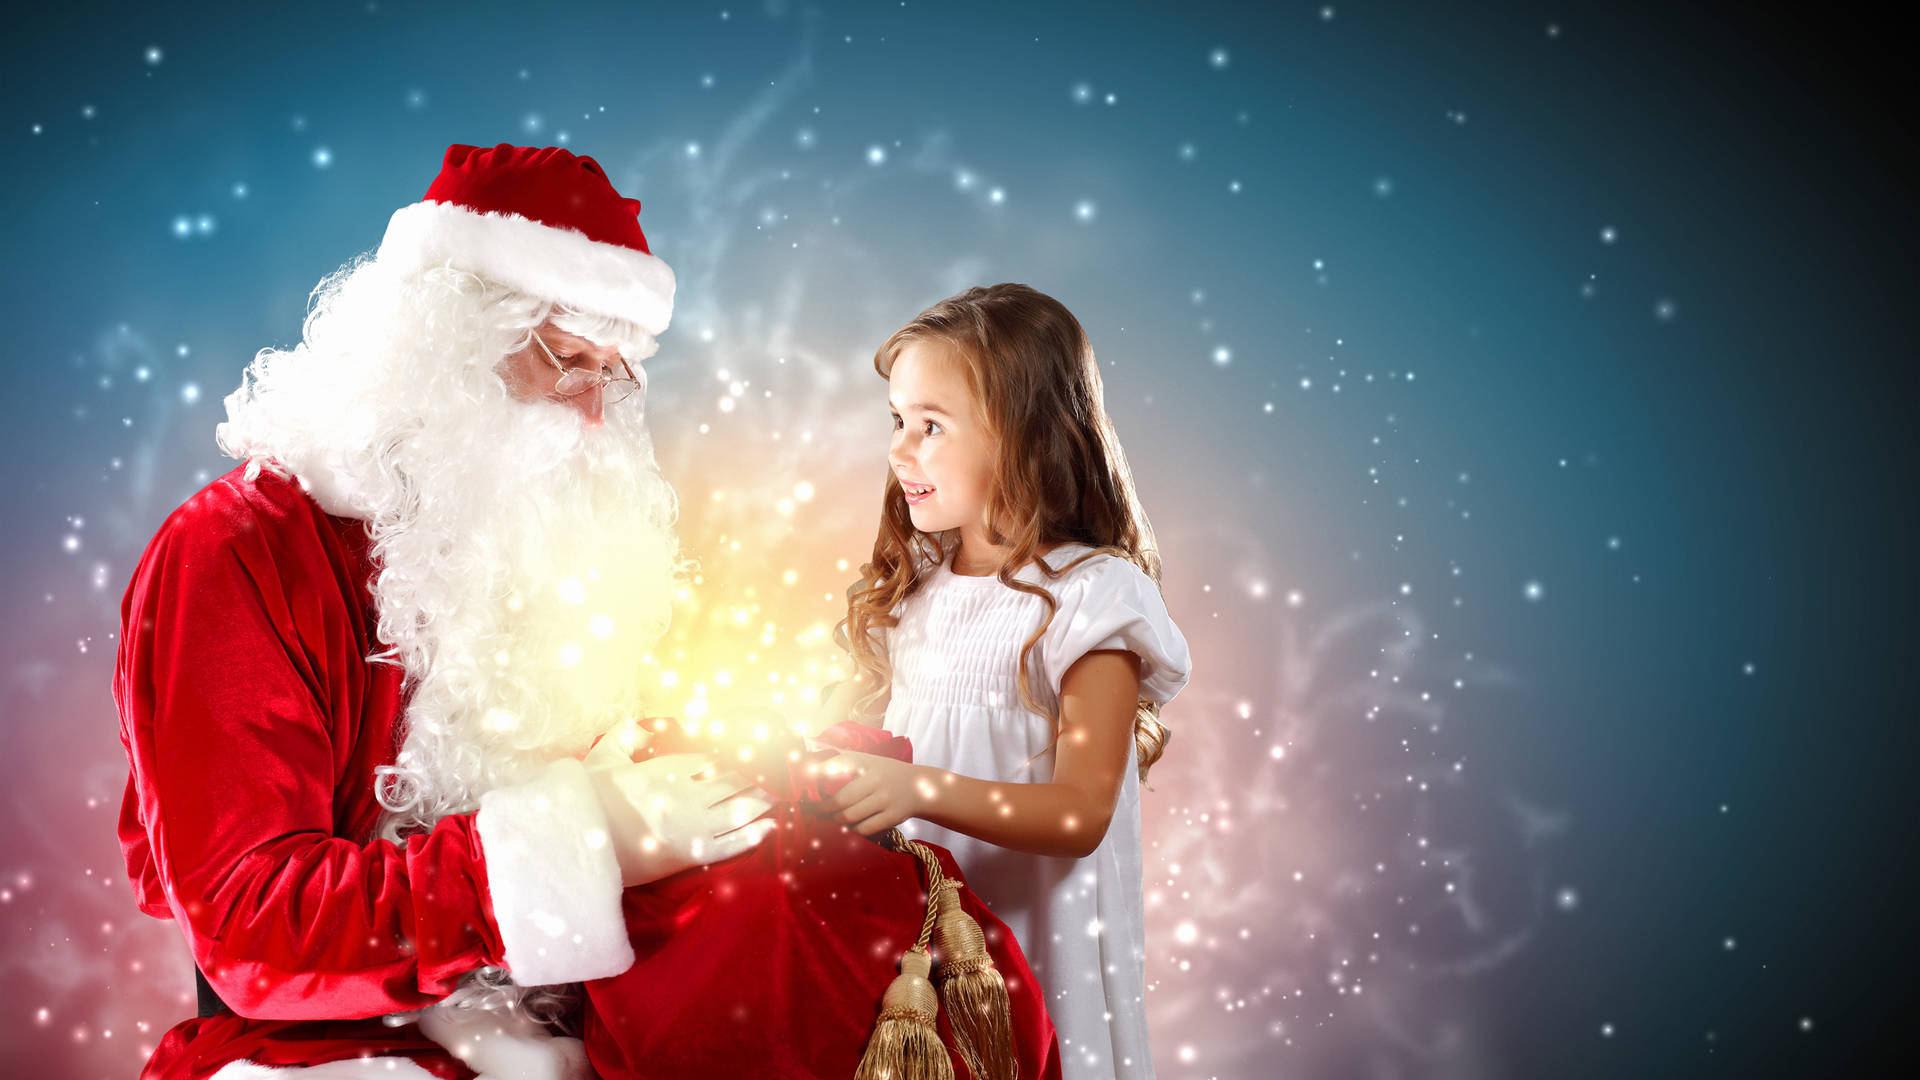 Santa Claus 2560X1440 Wallpaper and Background Image